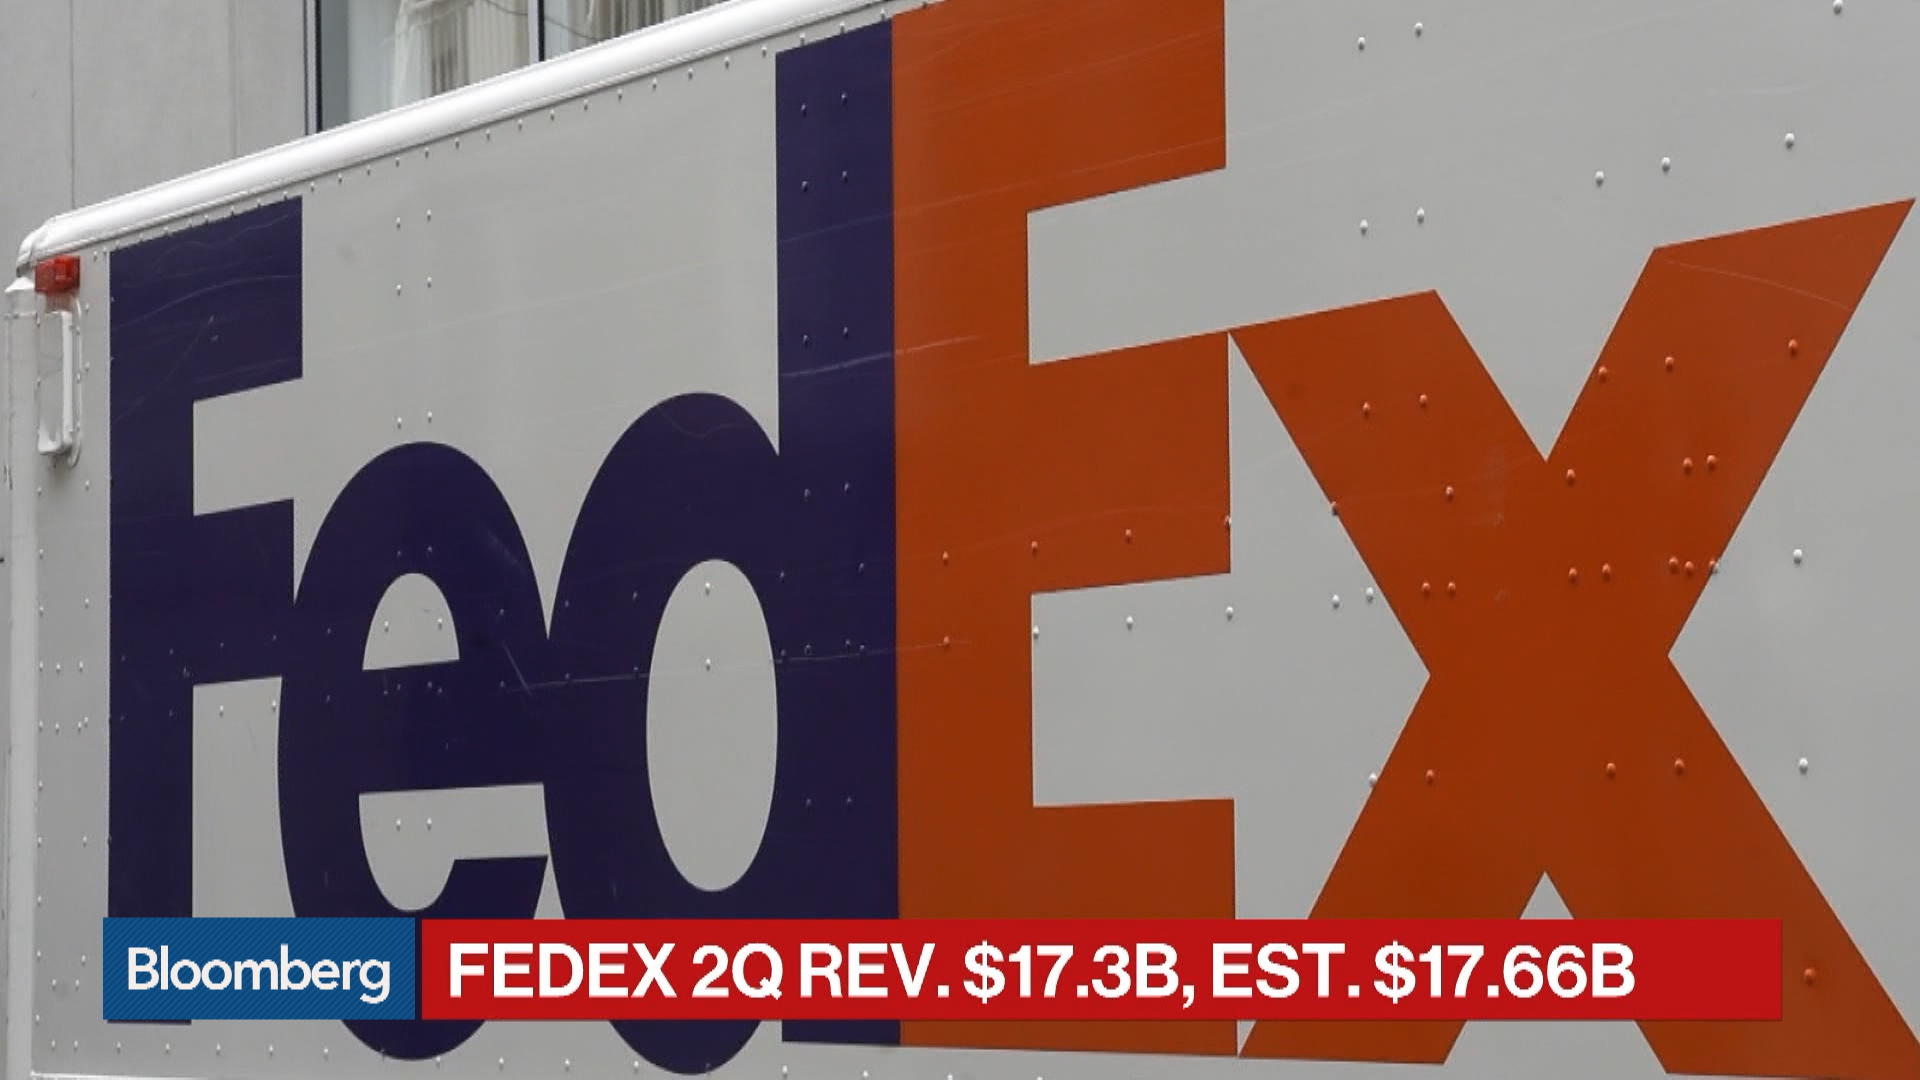 FedEx Jumps After Boosting Forecast as Cost Cuts Take Hold - BNN Bloomberg